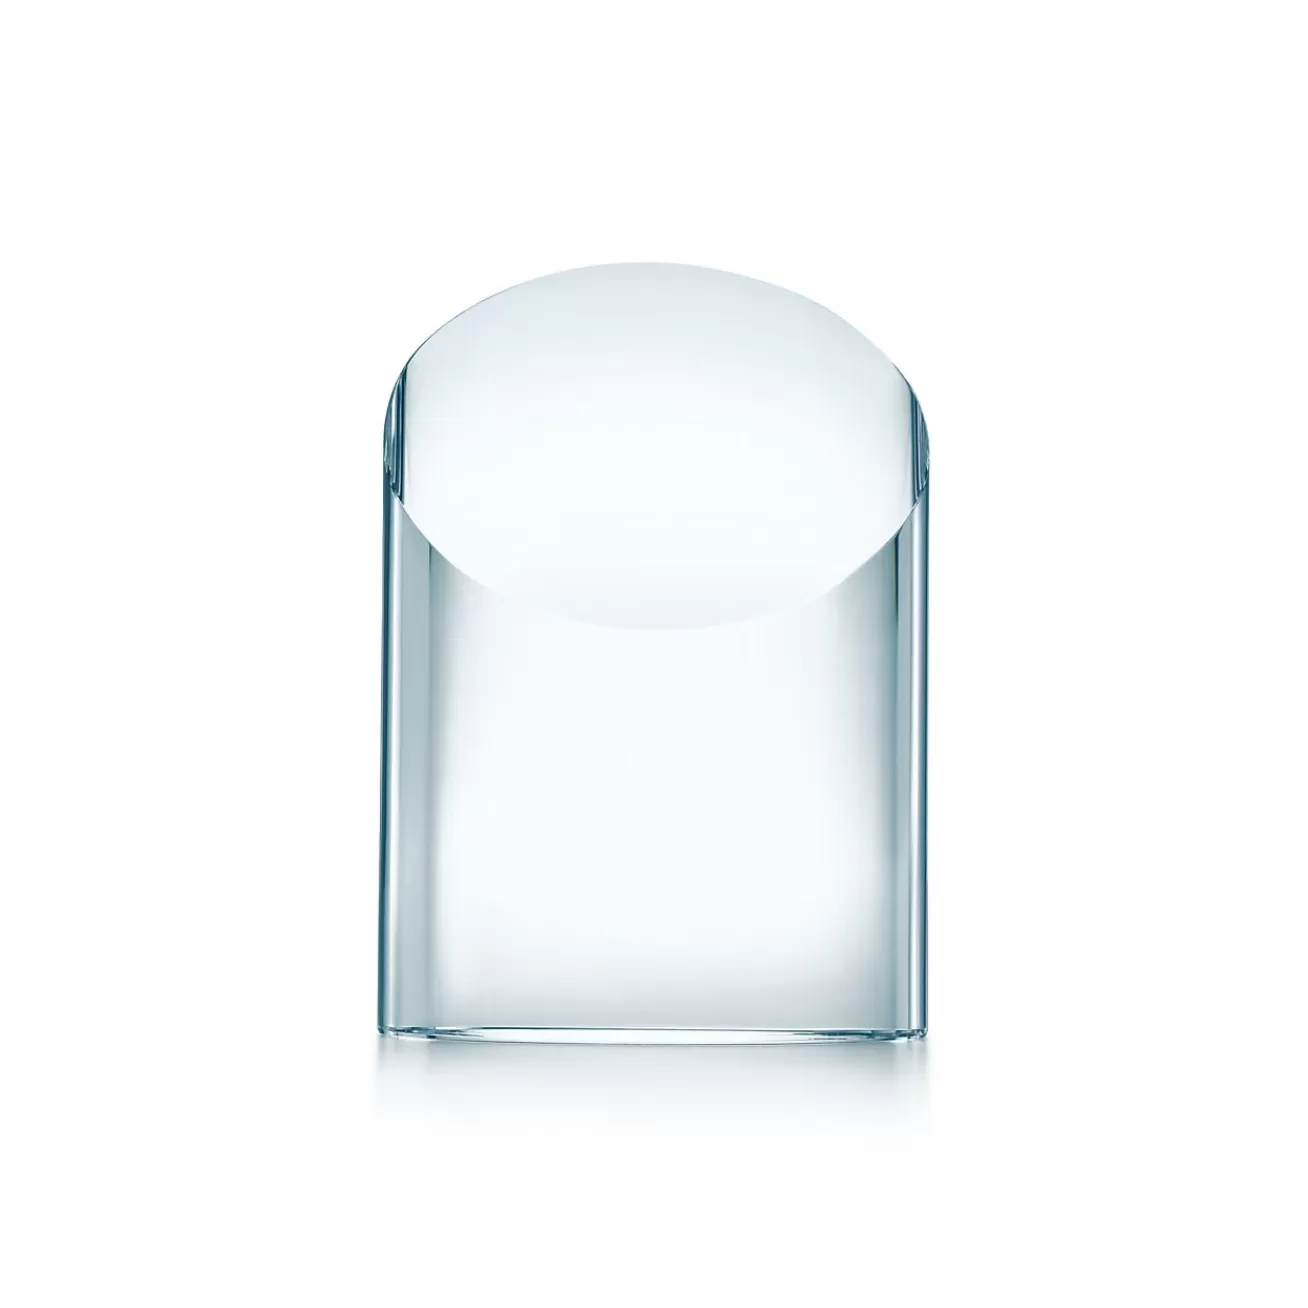 Tiffany & Co. Slant-cut oval award in glass, 6.5" high. | ^ Business Gifts